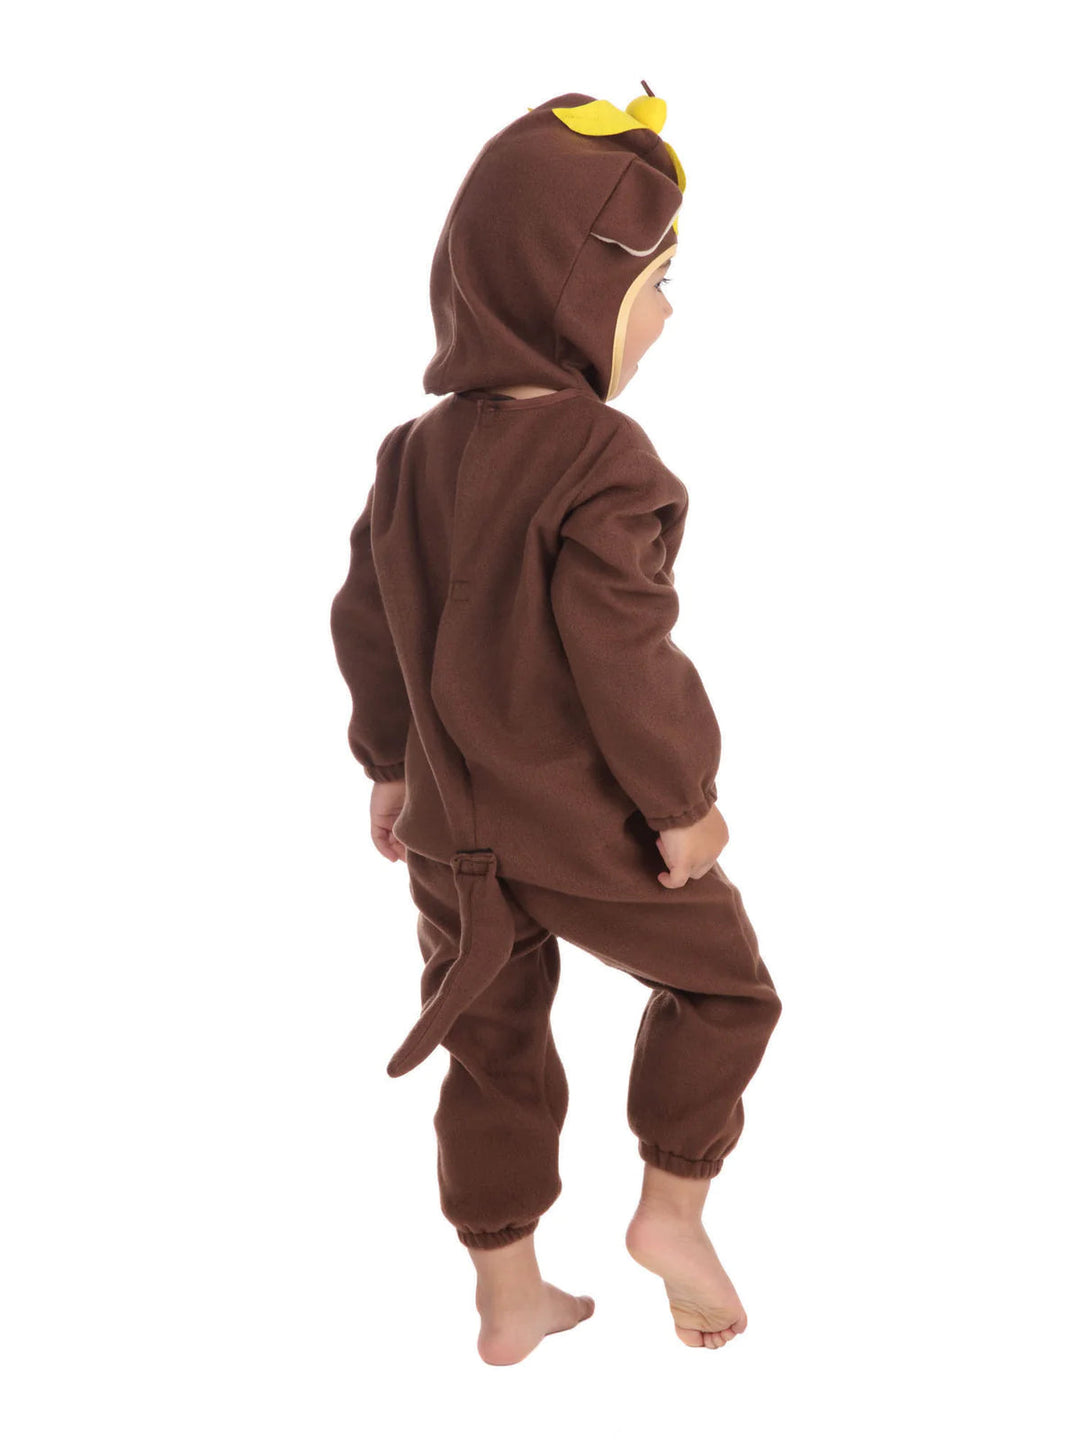 Size Chart Monkey Toddler Costume Cute Jumpsuit with Banana